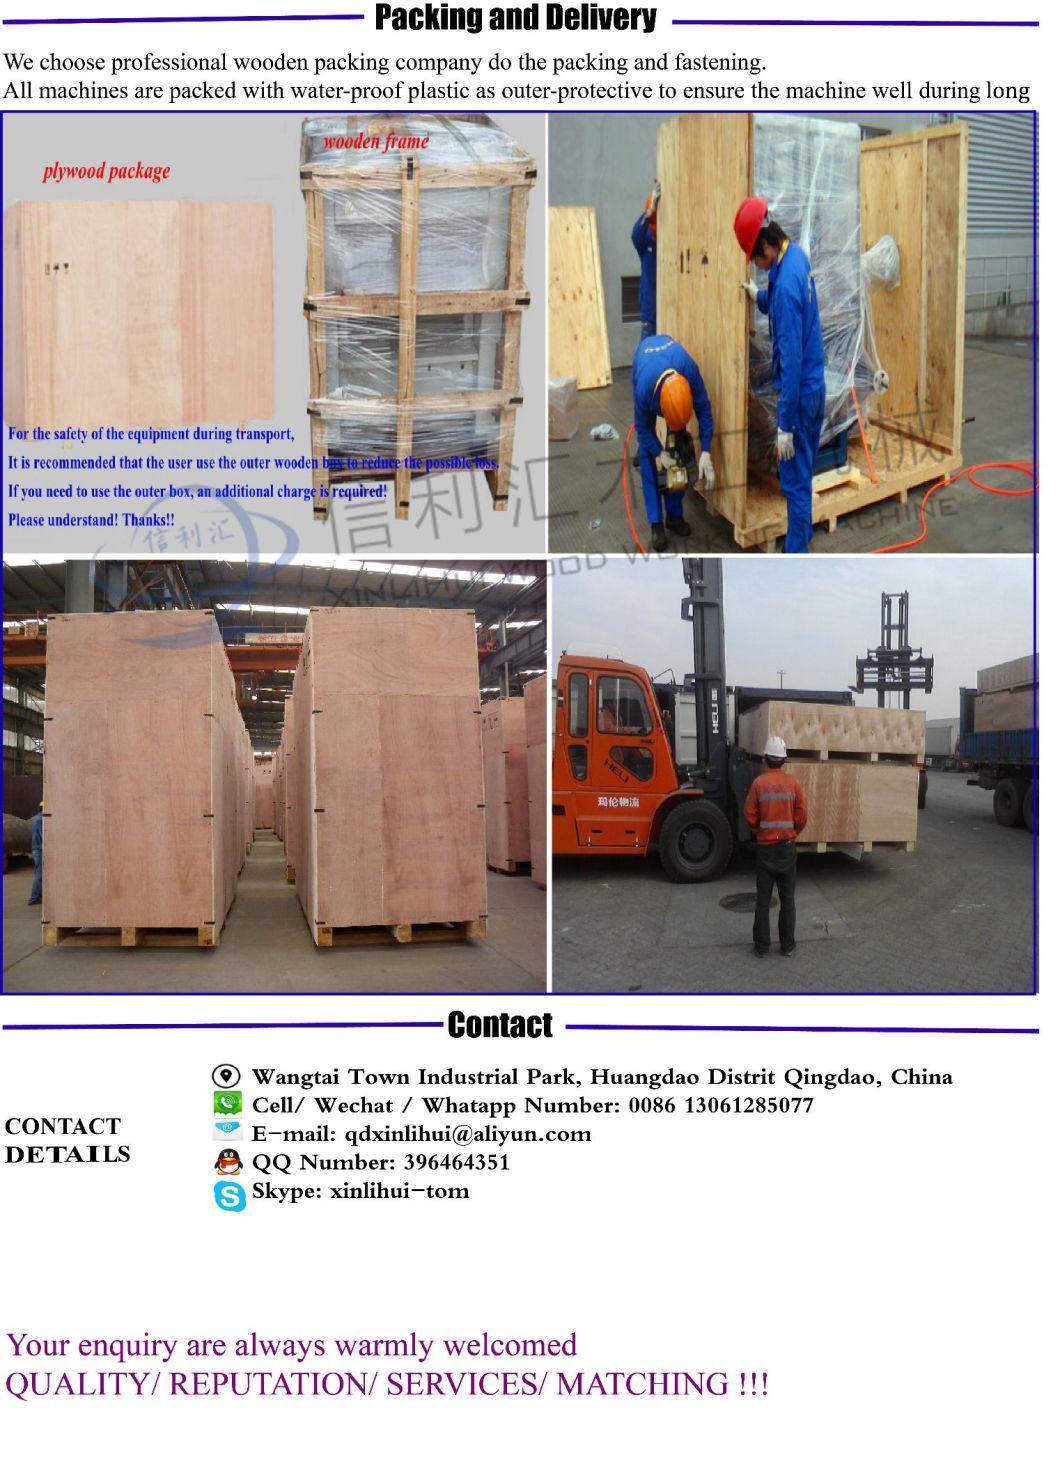 Hot Press Surface Materials for Wood Door/ Flat Surface Board Hot Laminator Wooden Product Machines